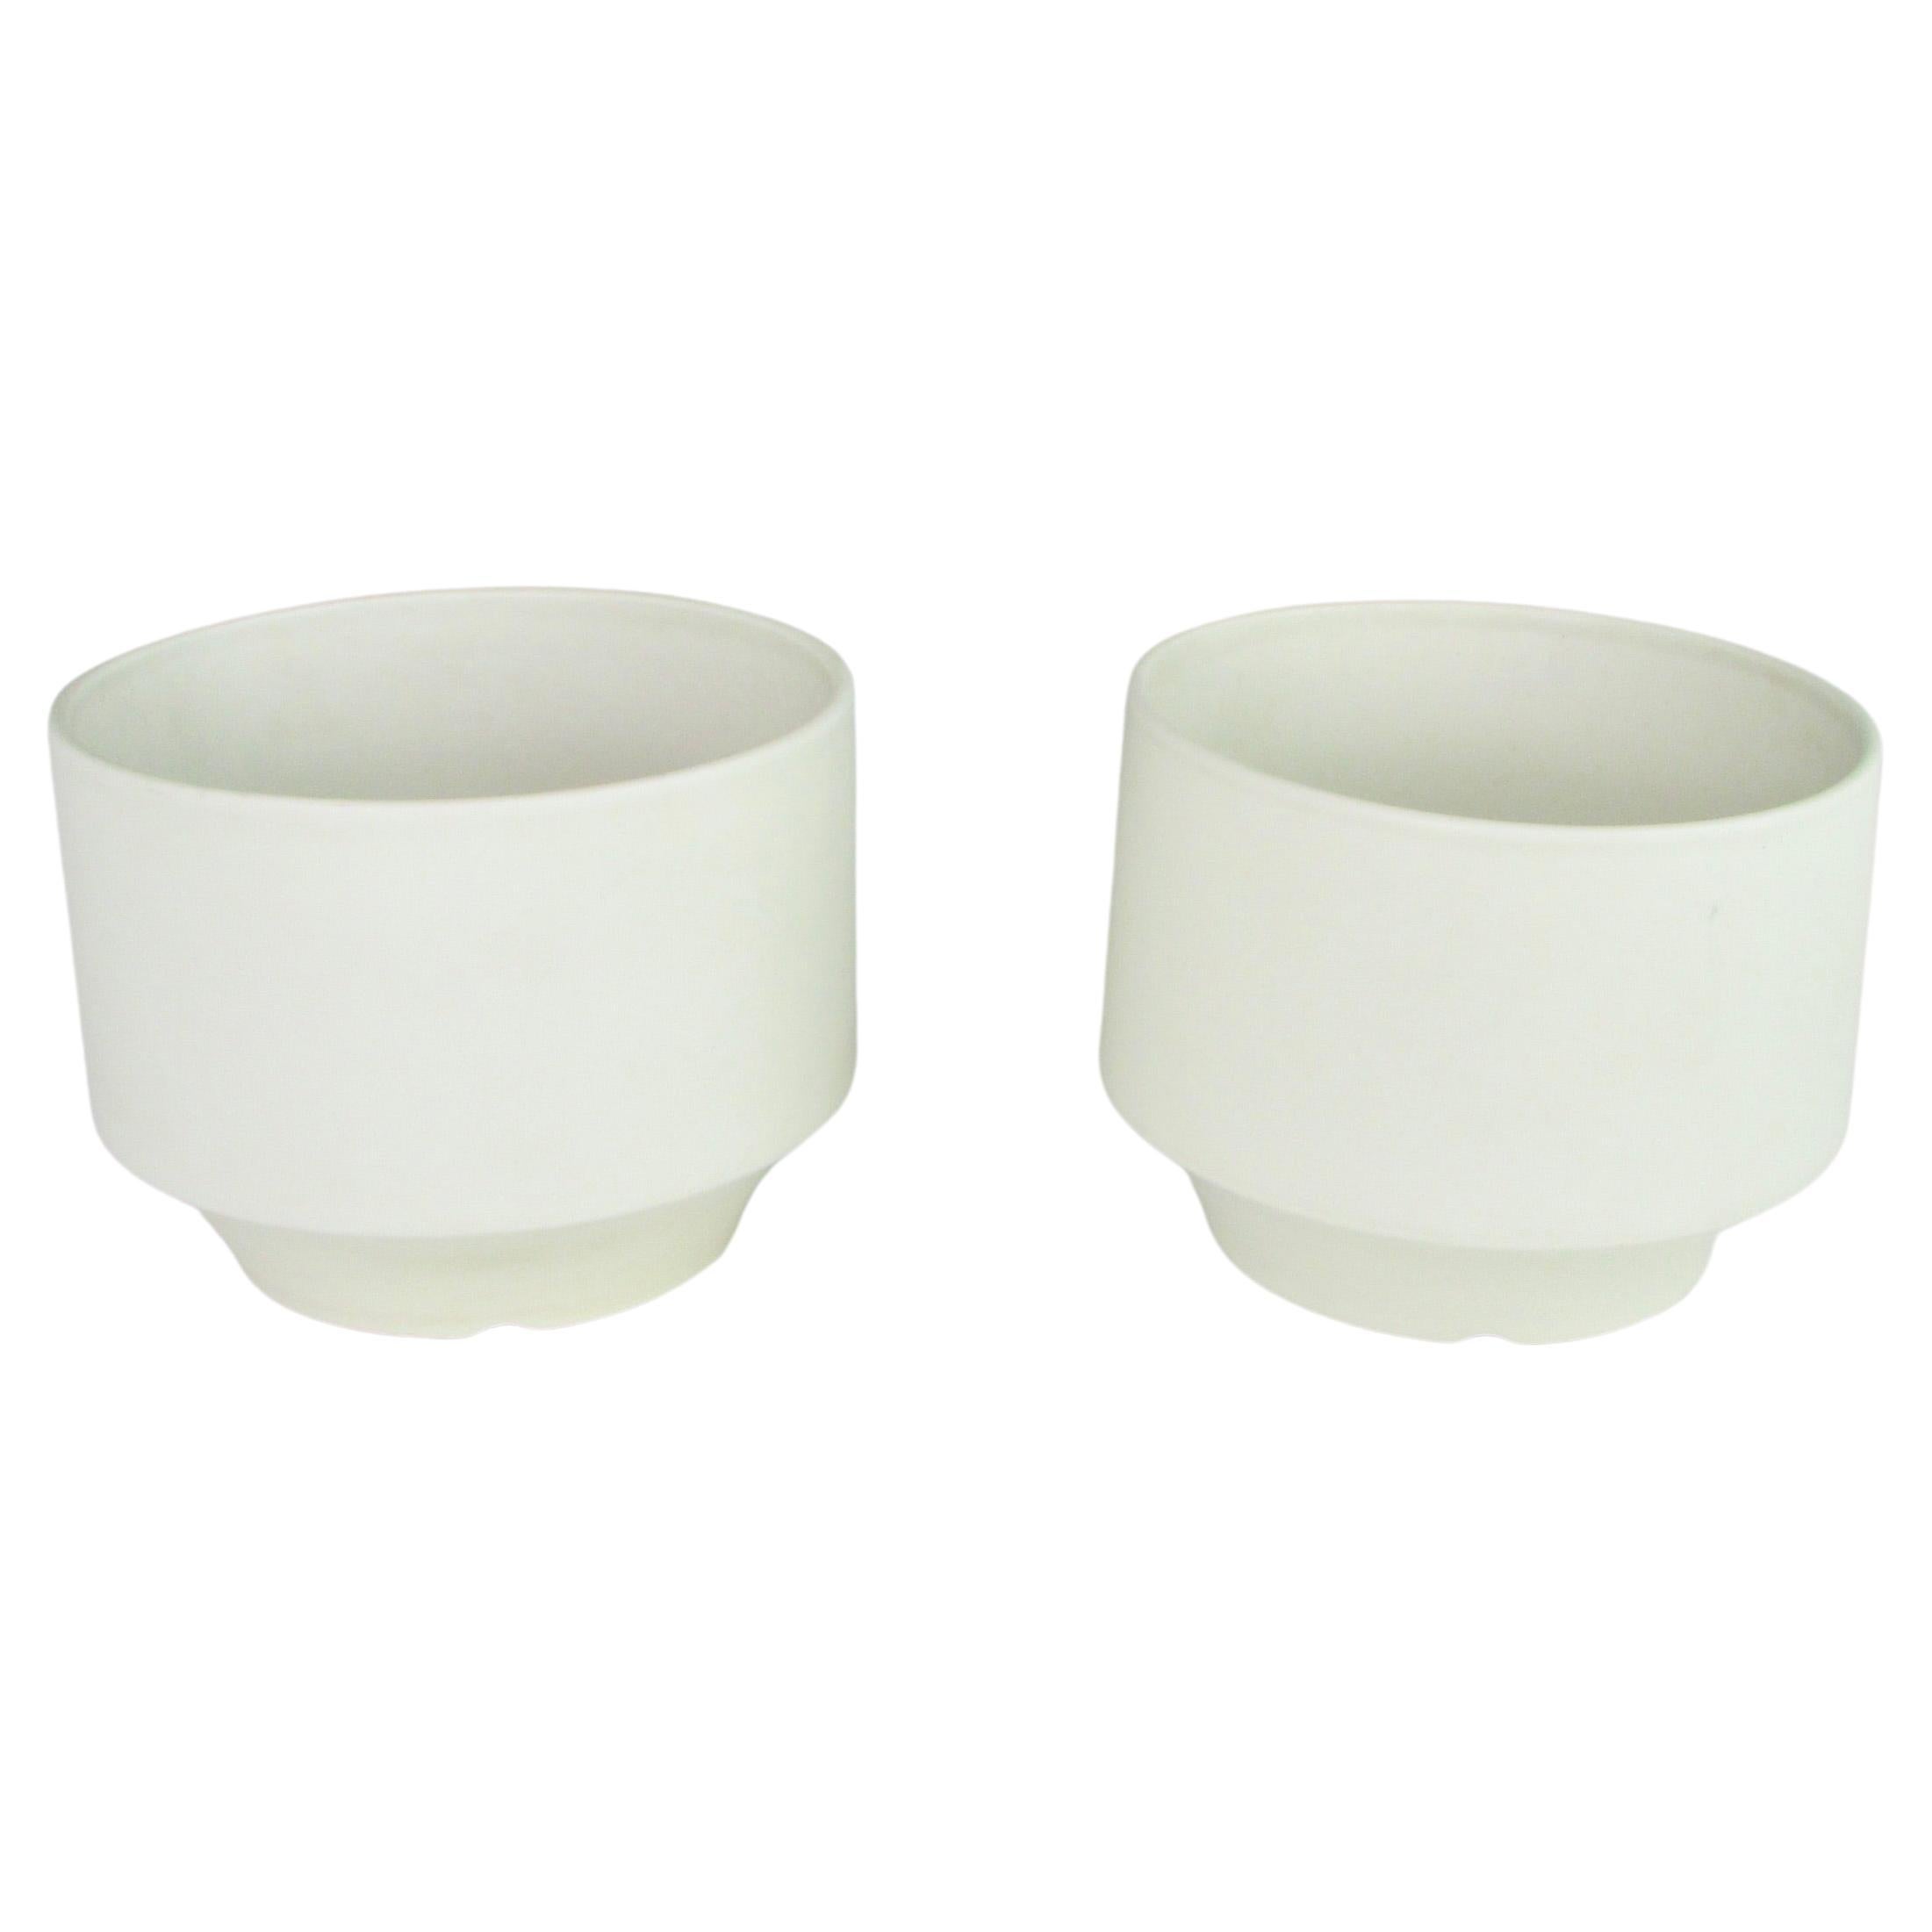 Pair of Richard Lindh for Arabia of Finland Bisque White Planter Pots